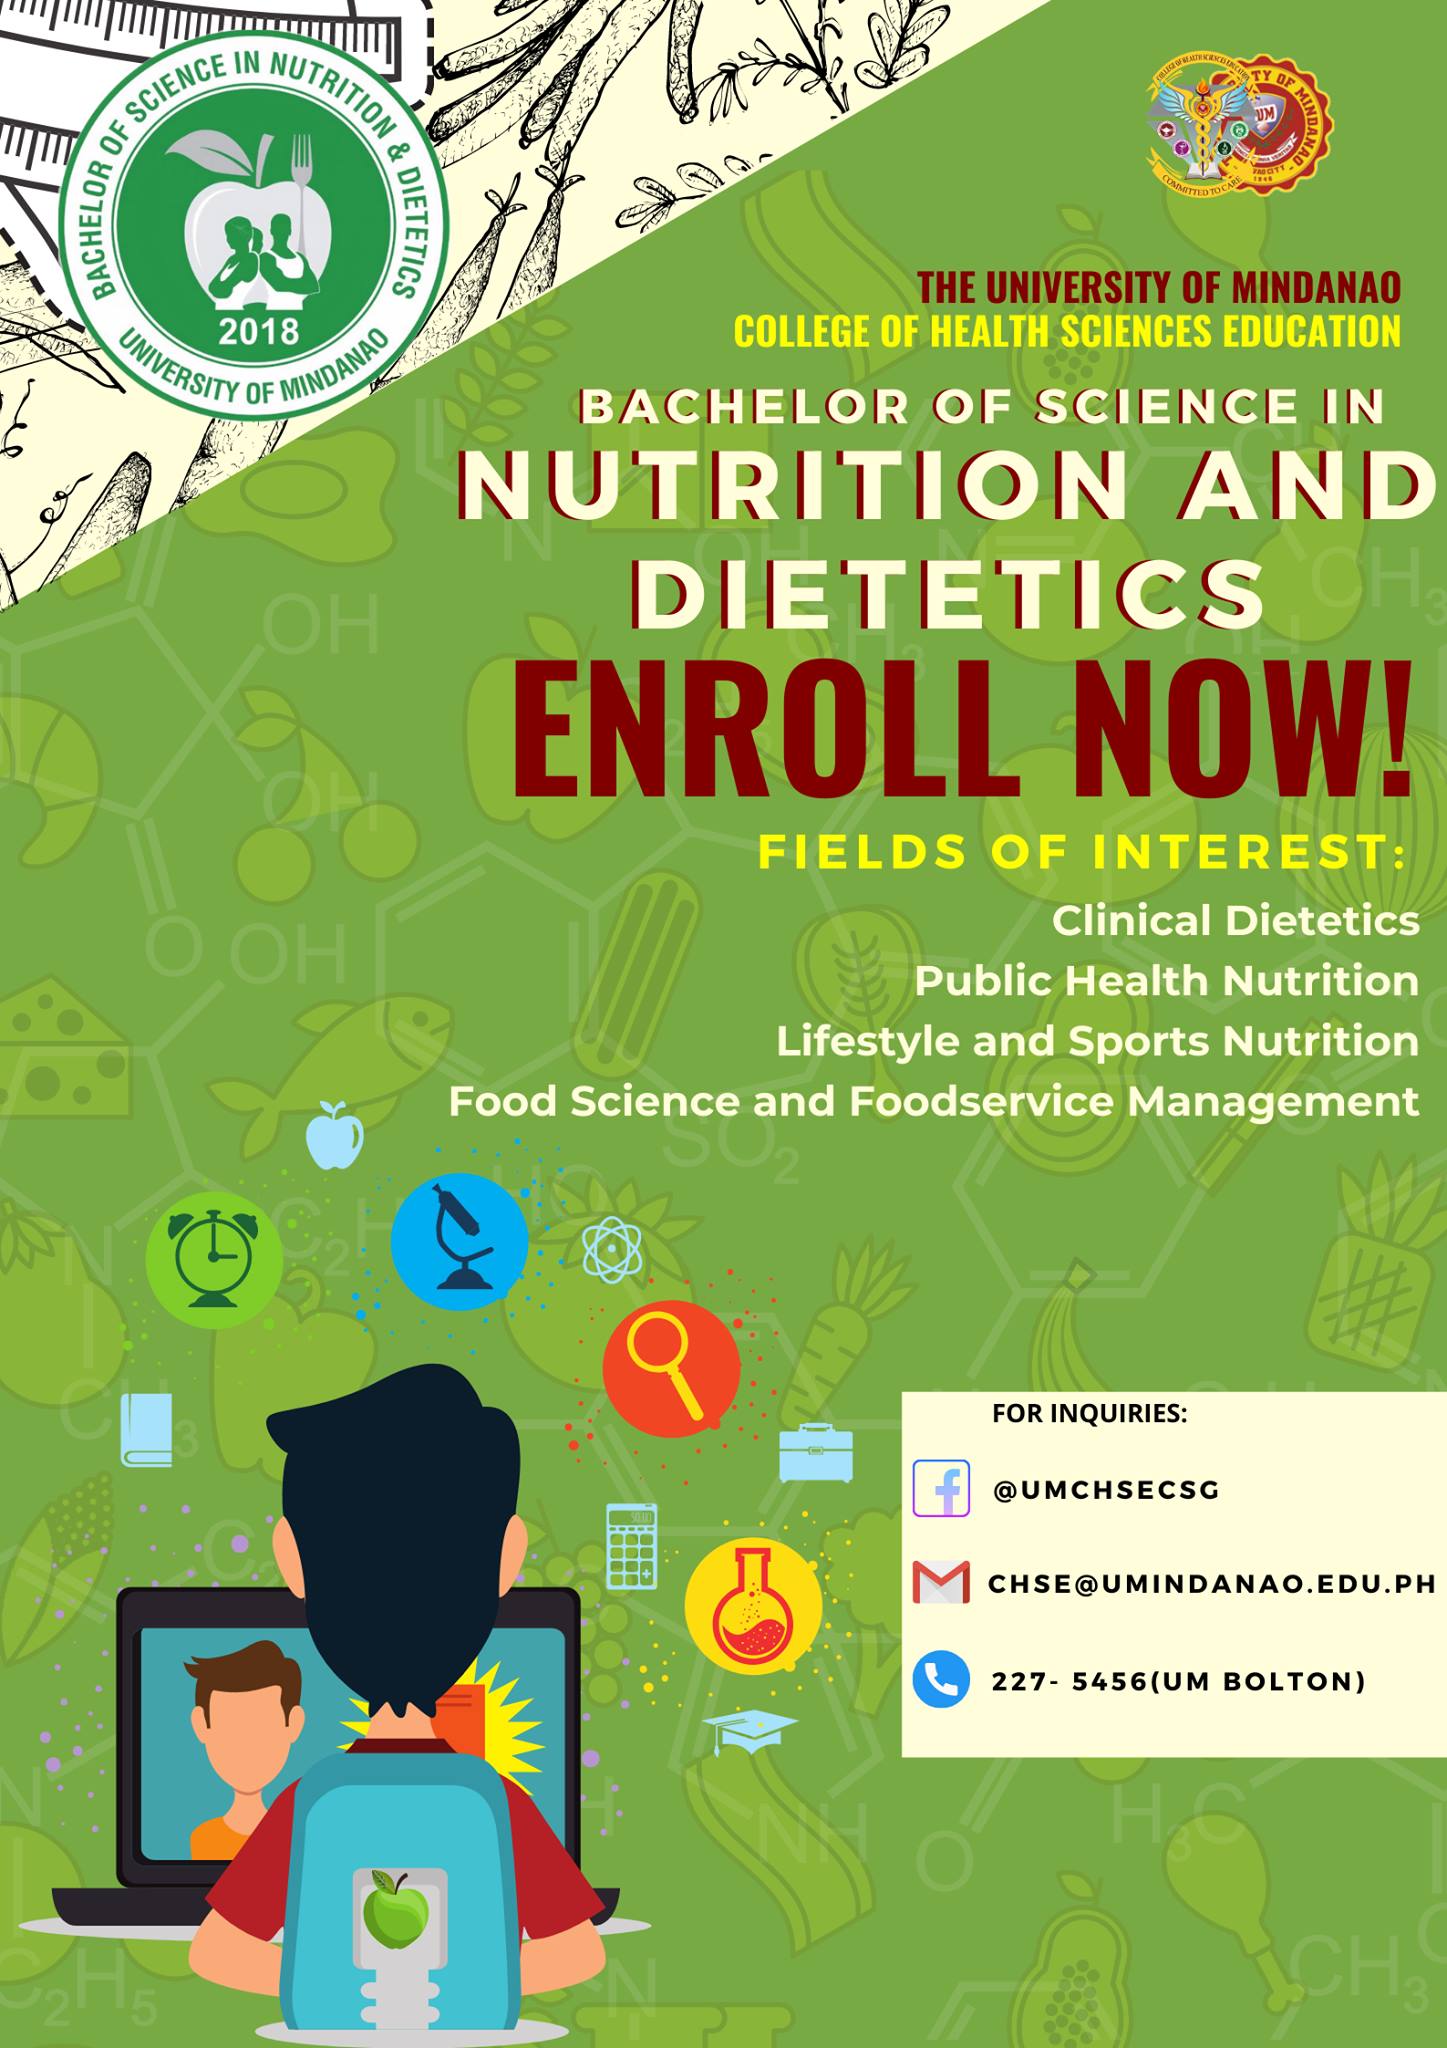 Dreaming of a career in Nutrition and Dietetics? Enroll with CHSE!